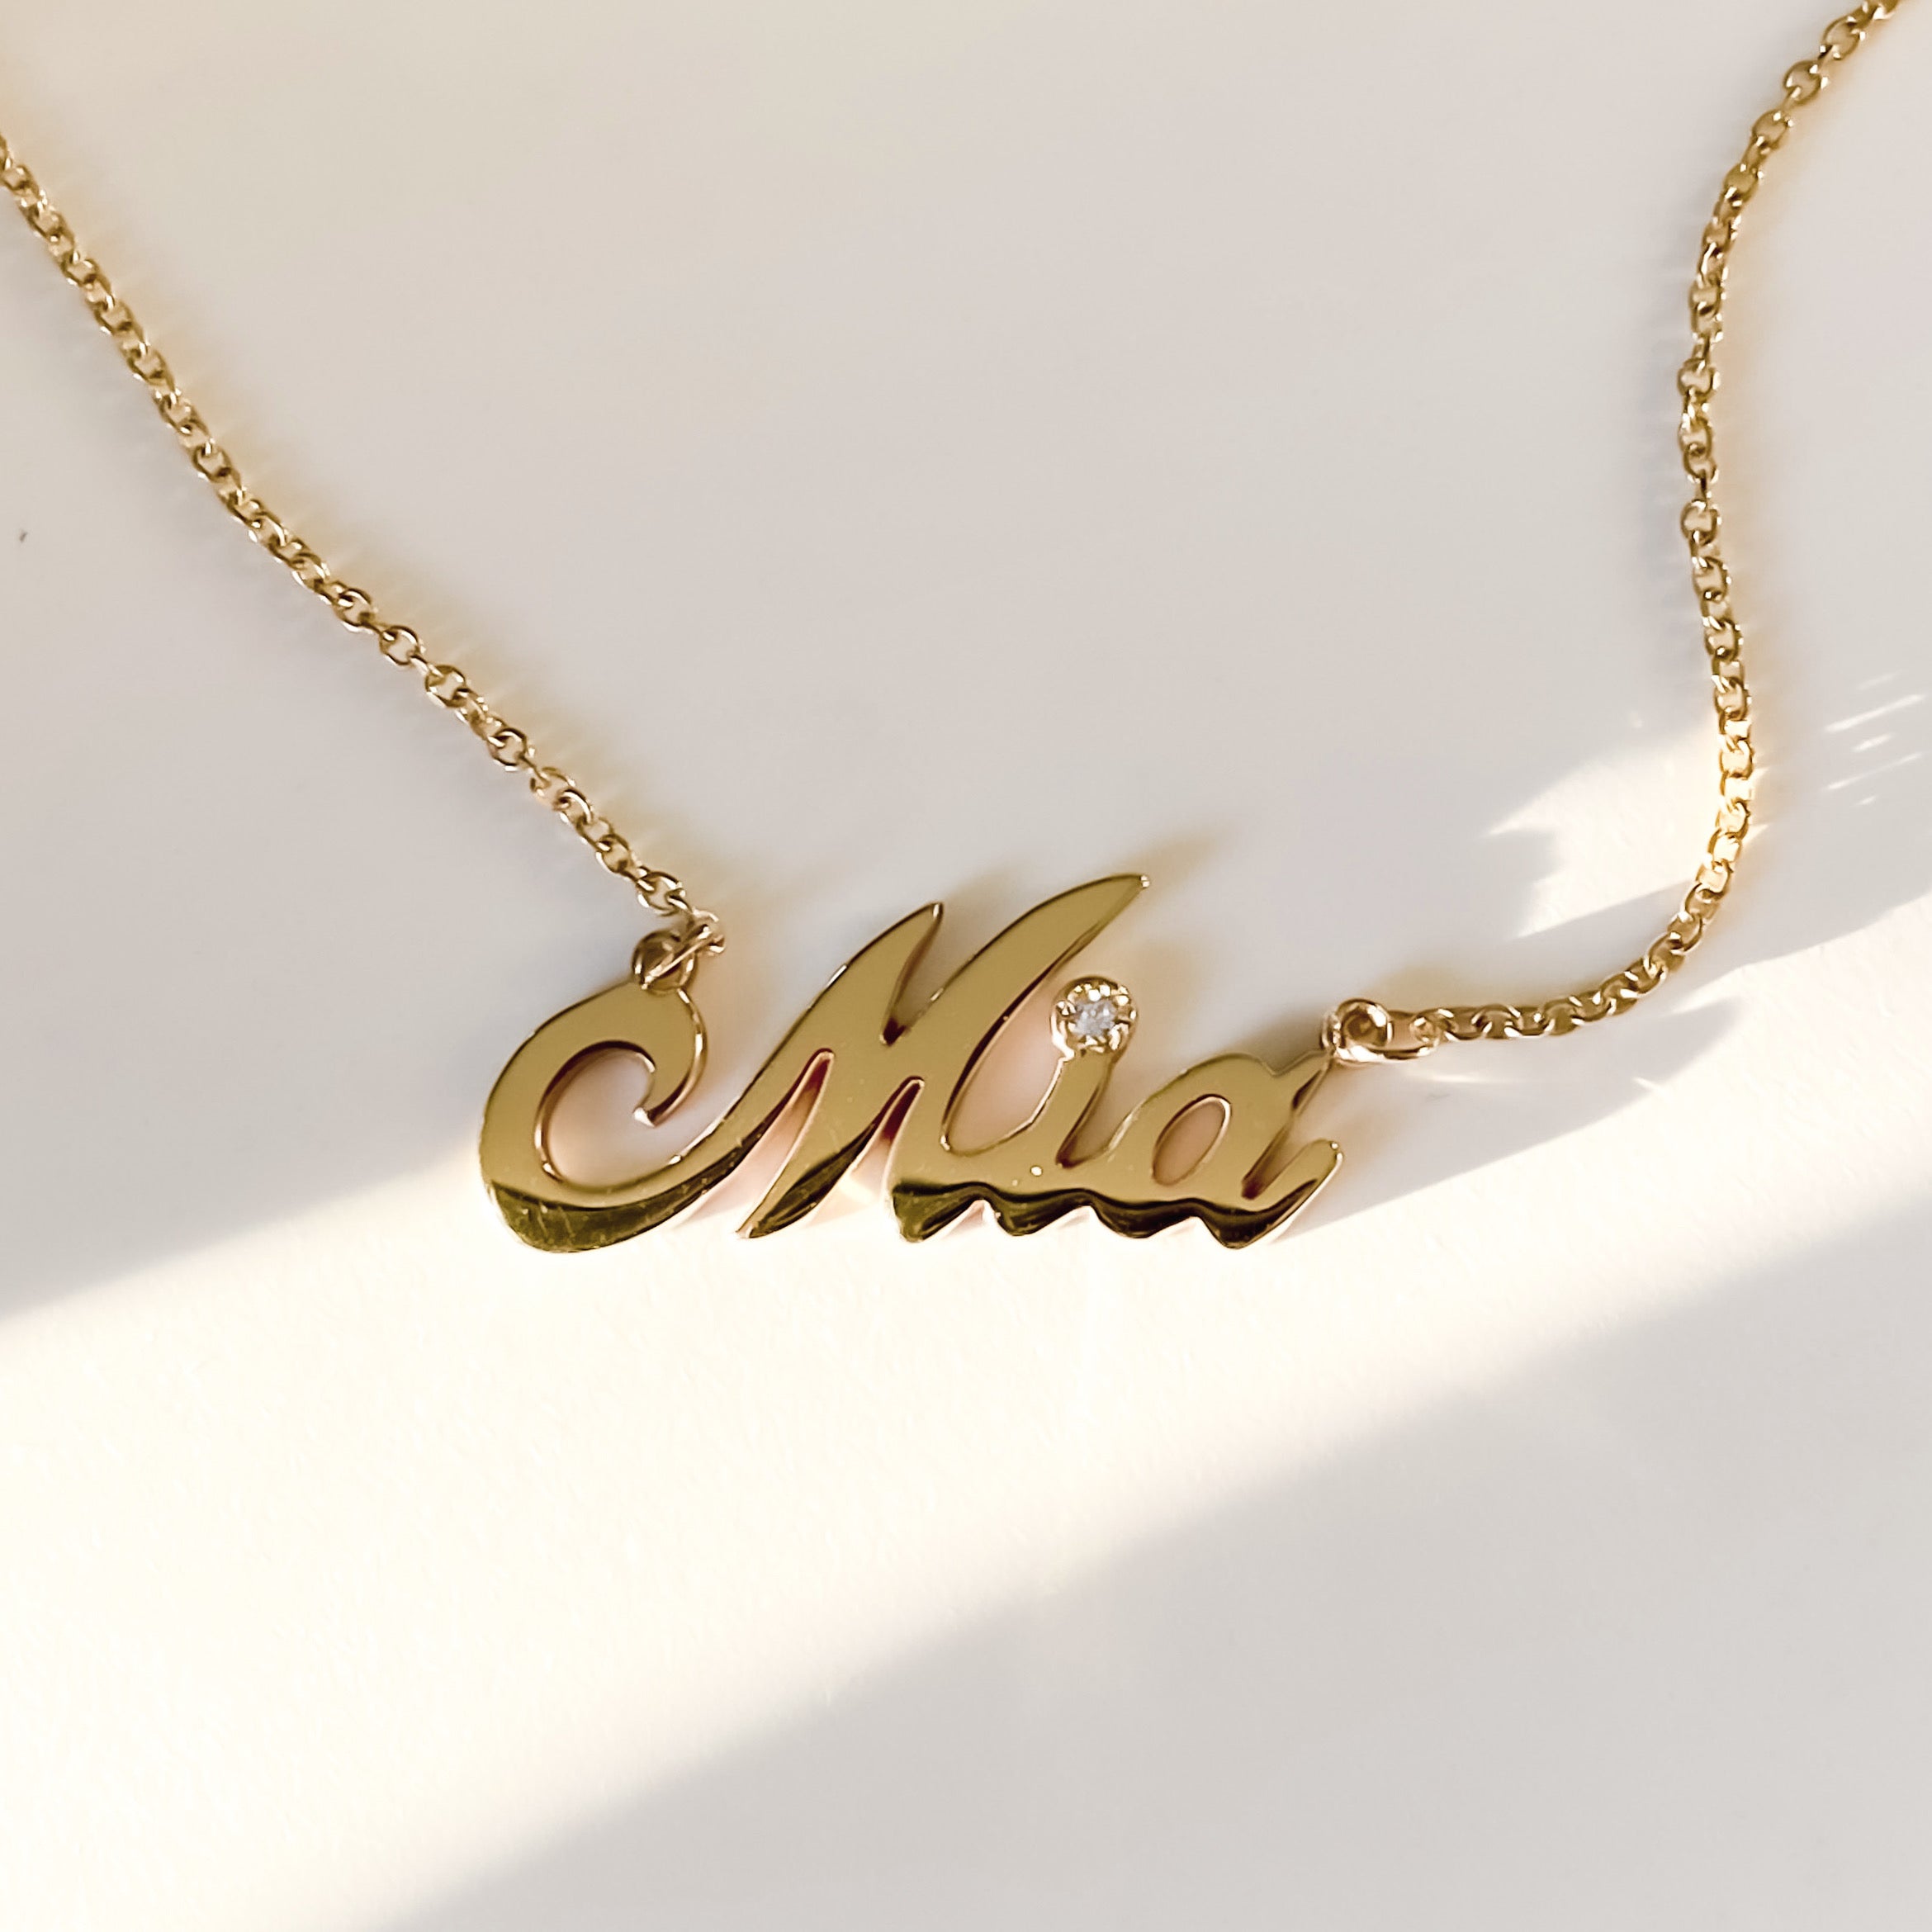 Personalized first name necklace